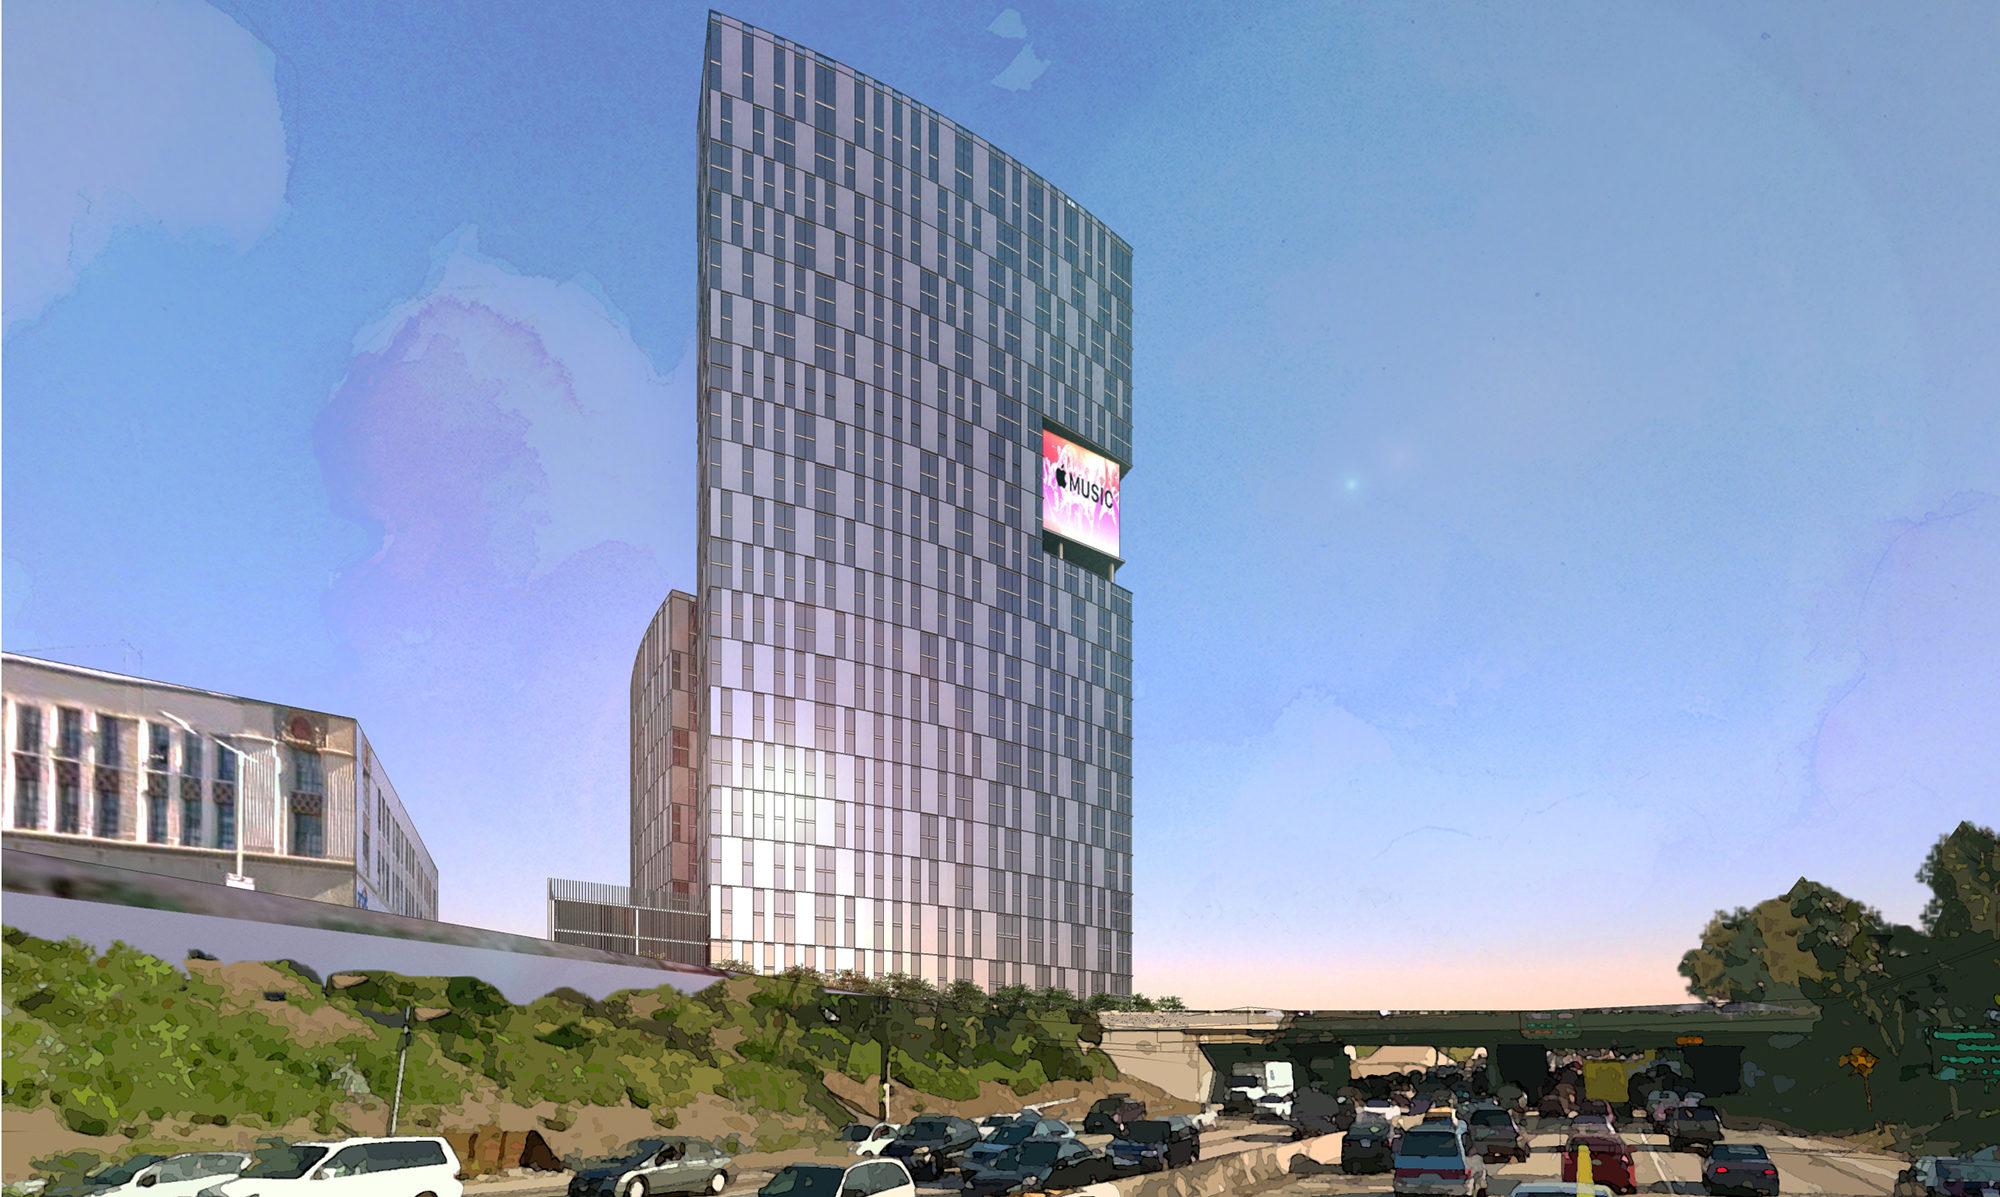 Rendering of silver high rise from across the street view.